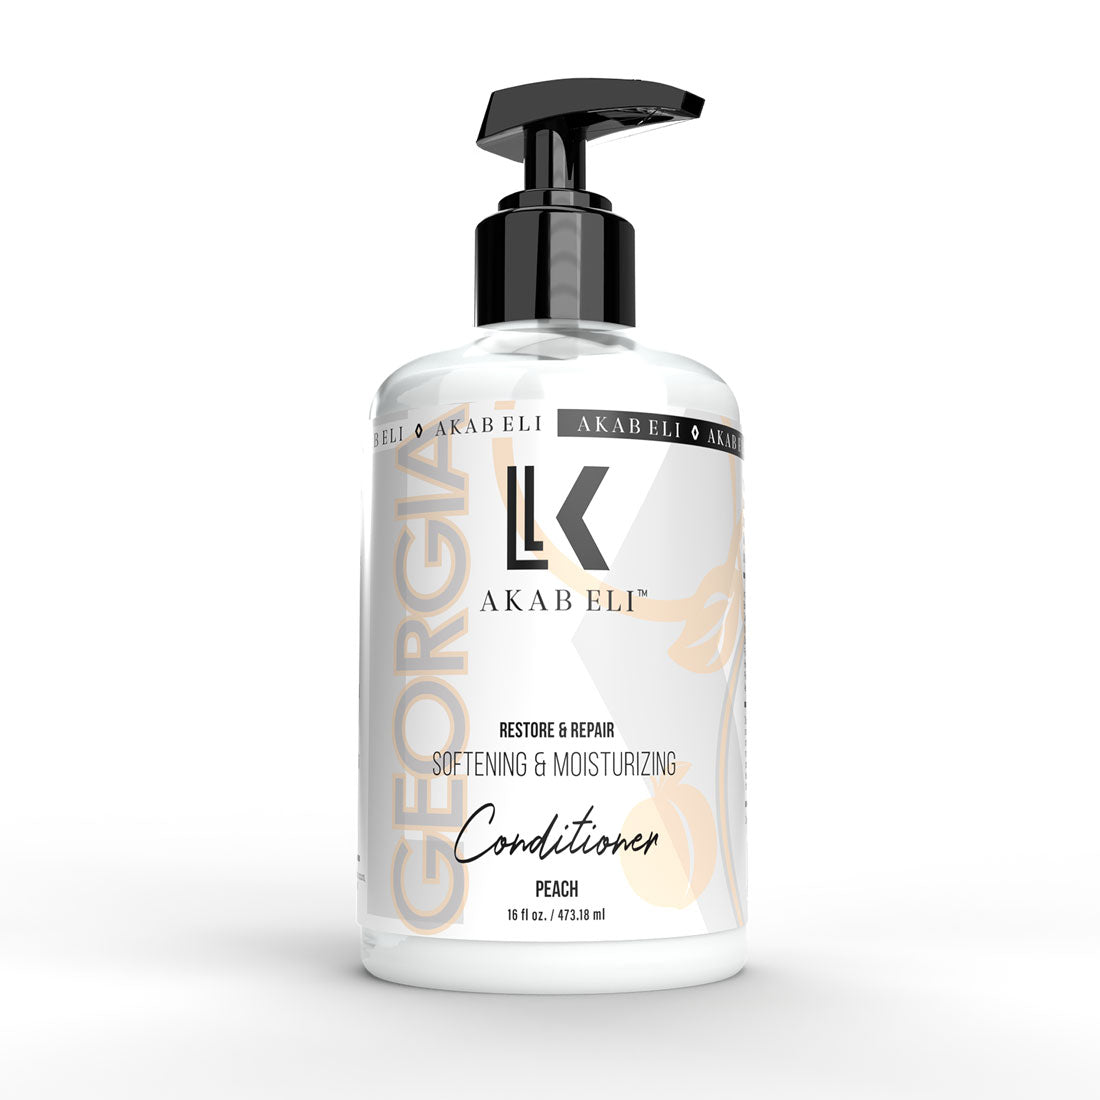 Akab Eli Georgia Hair Conditioner - A Softening & Moisturizing Wash Full of Natural Ingredients Peach Scented